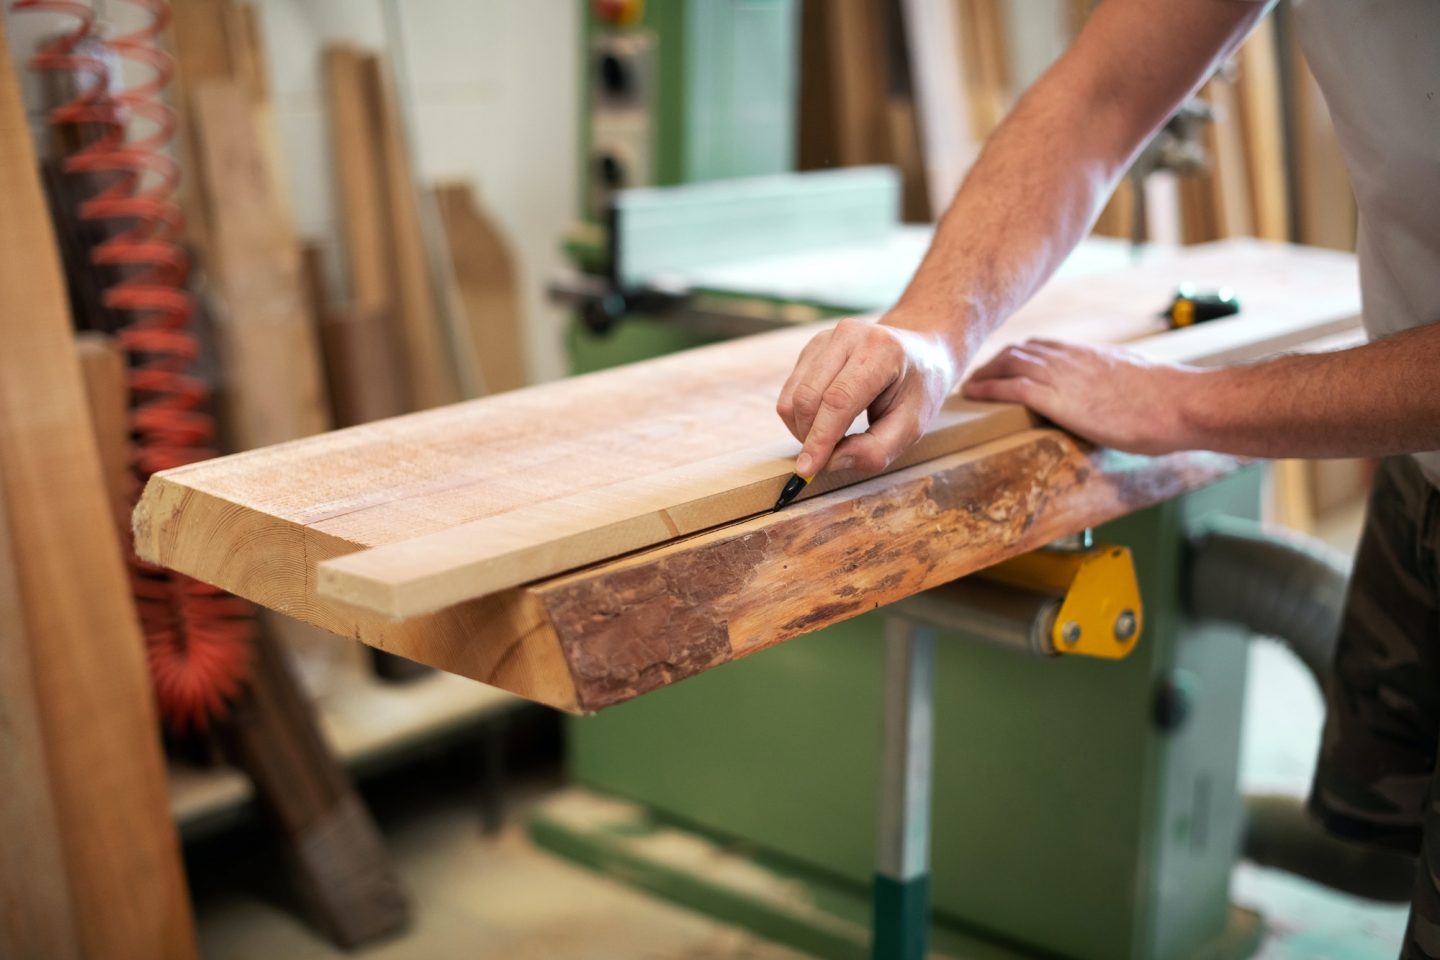 3 Tips for Getting the Best Wood Without Having to Ask a Carpenter